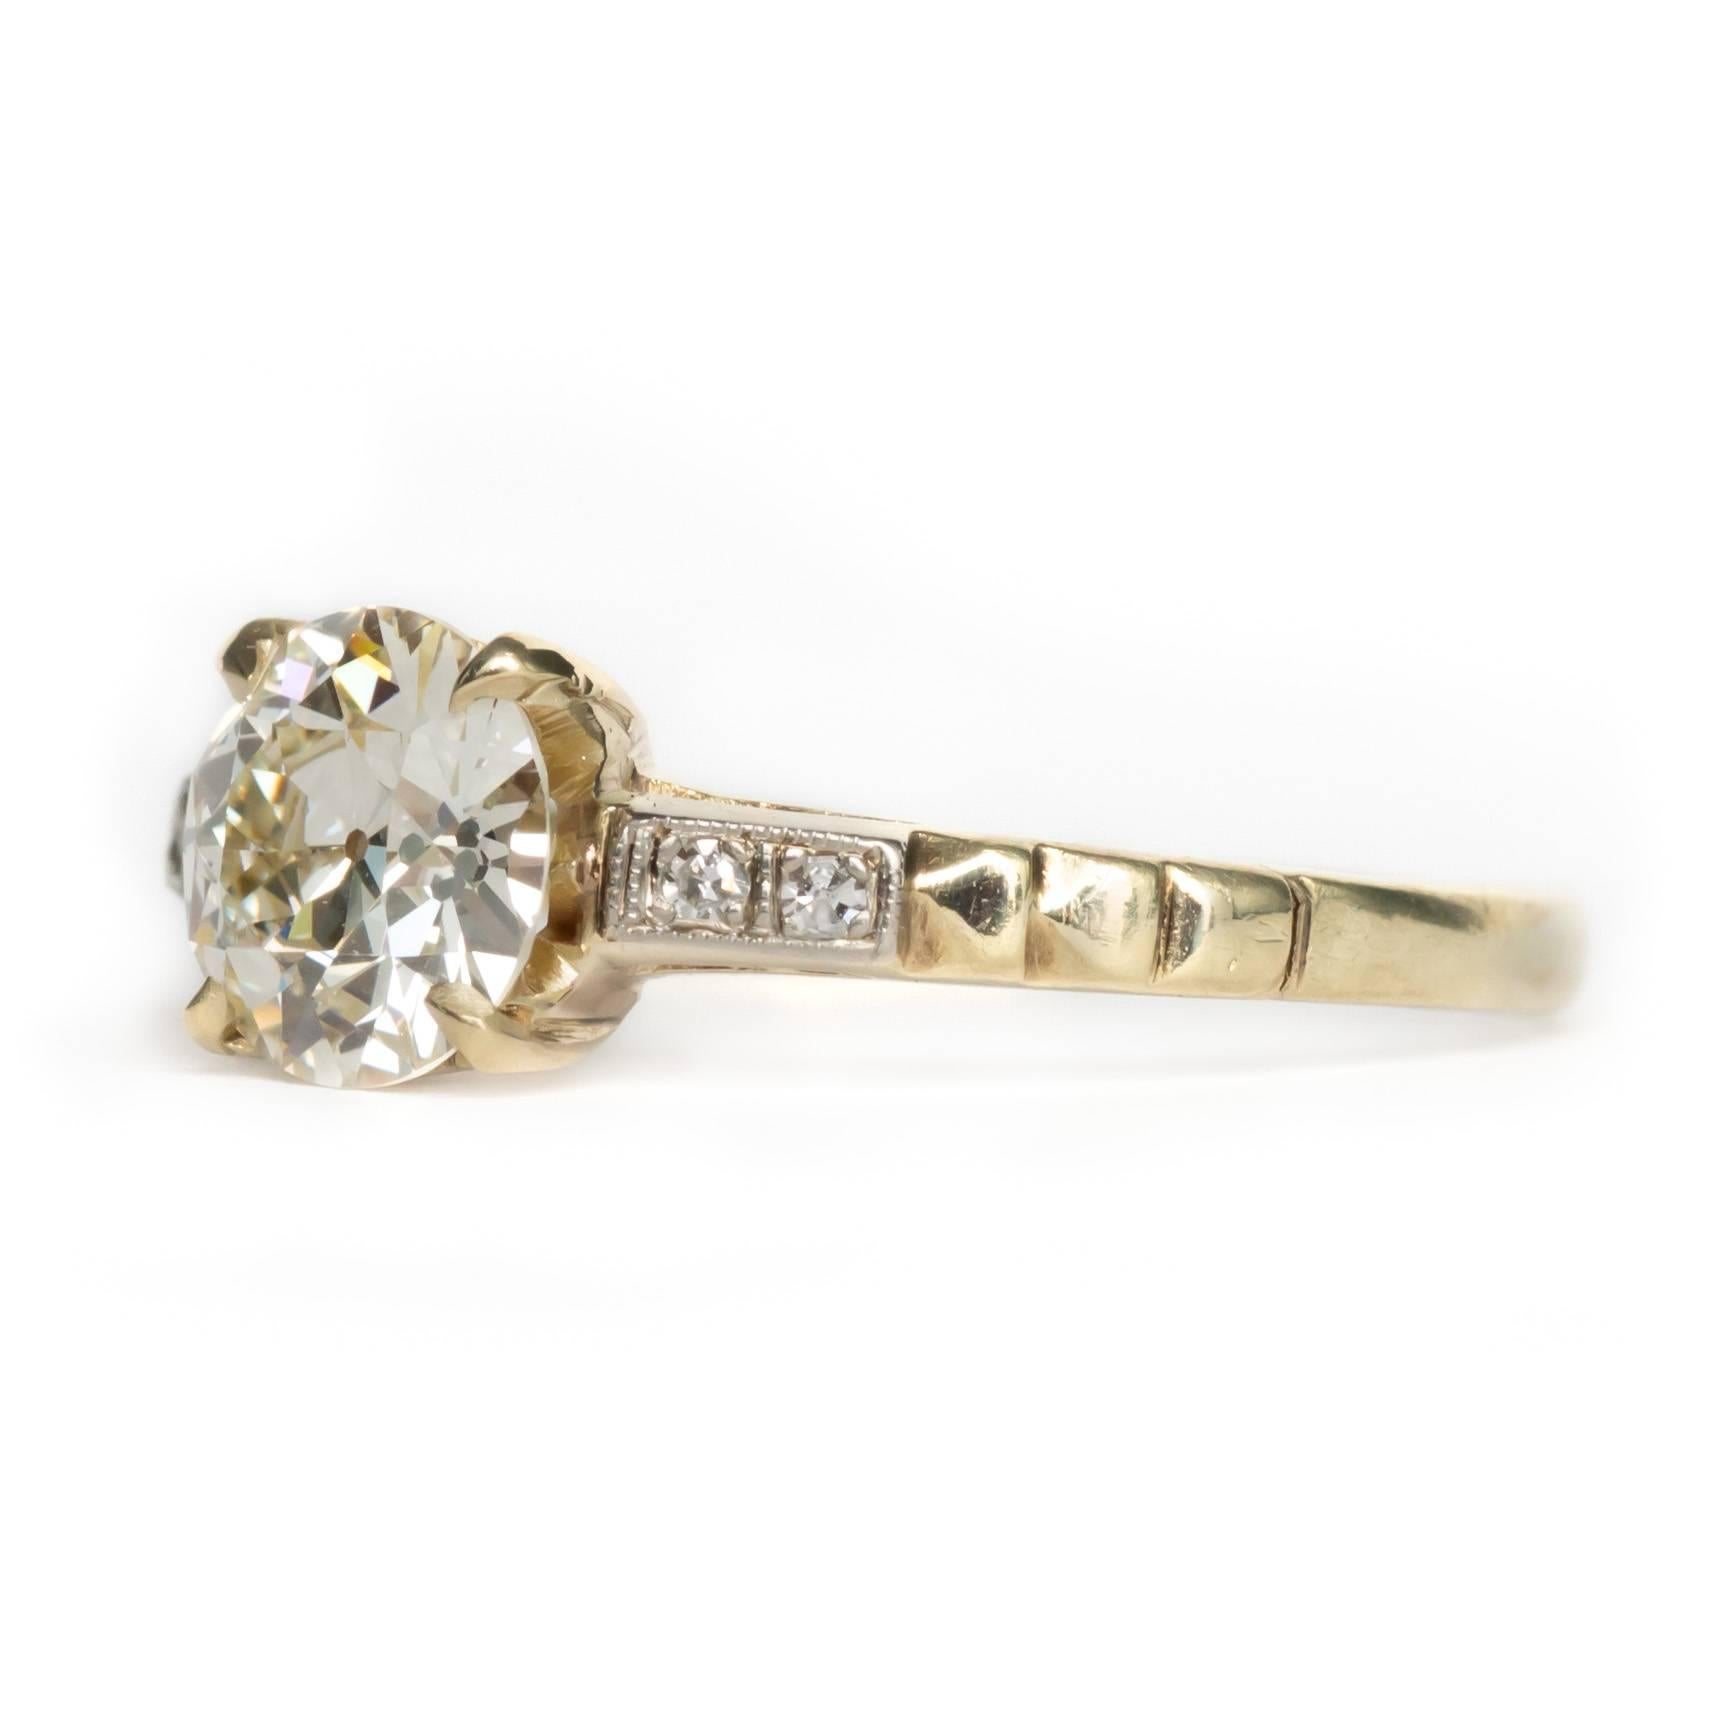 Item Details: 
Ring Size: 8
Metal Type: 14 Karat Yellow Gold
Weight: 2.9 grams

Center Stone Details:
Size: 1.35ct
Shape: Old European Brilliant
Color: K 
Clarity: VS1


Side Stone Details: 
Shape: Antique European Cut
Total Carat Weight: .06 carat,